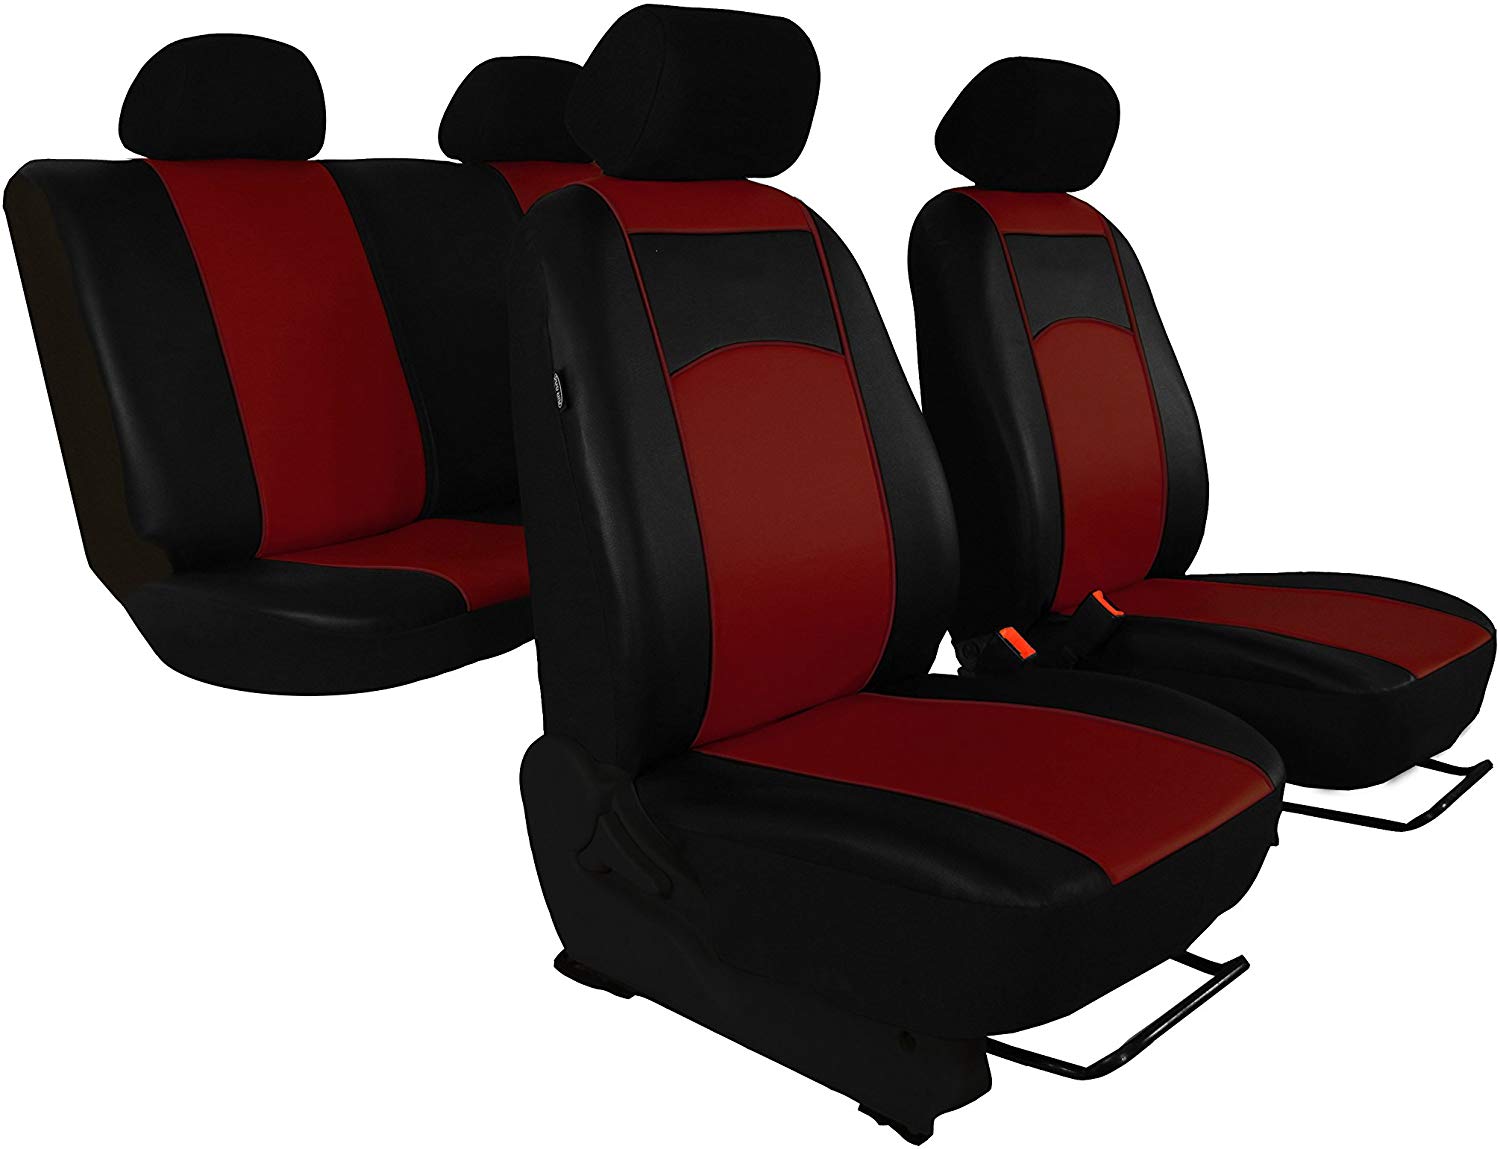 \'Universal Imitation Leather Seat Cover Set for Civic VII Design Faux Leather with Decorative Tuning.. Includes Dark Red.